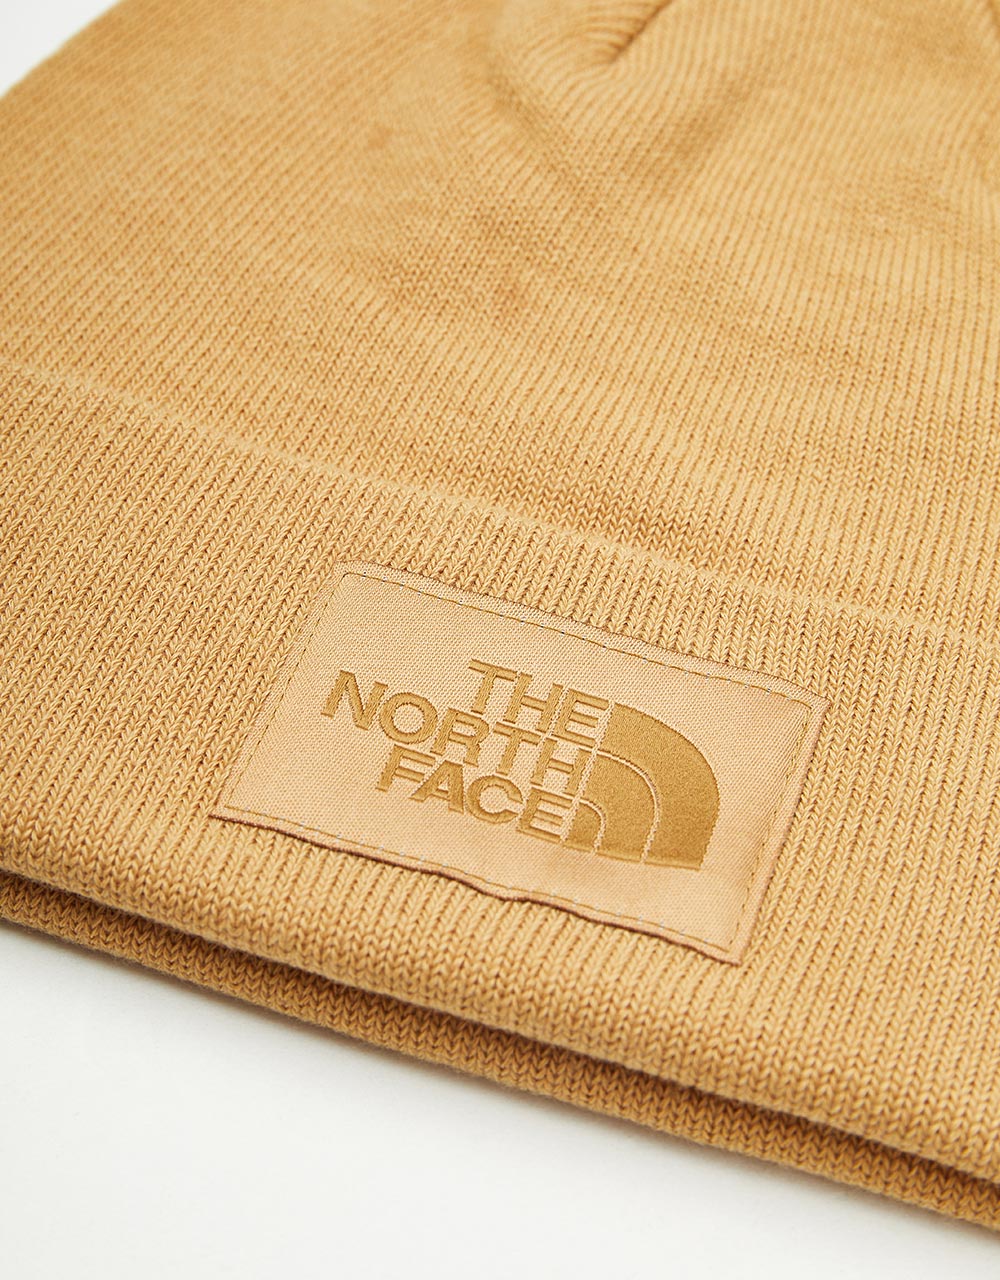 The North Face Dock Worker Recycled Beanie - Almond Butter